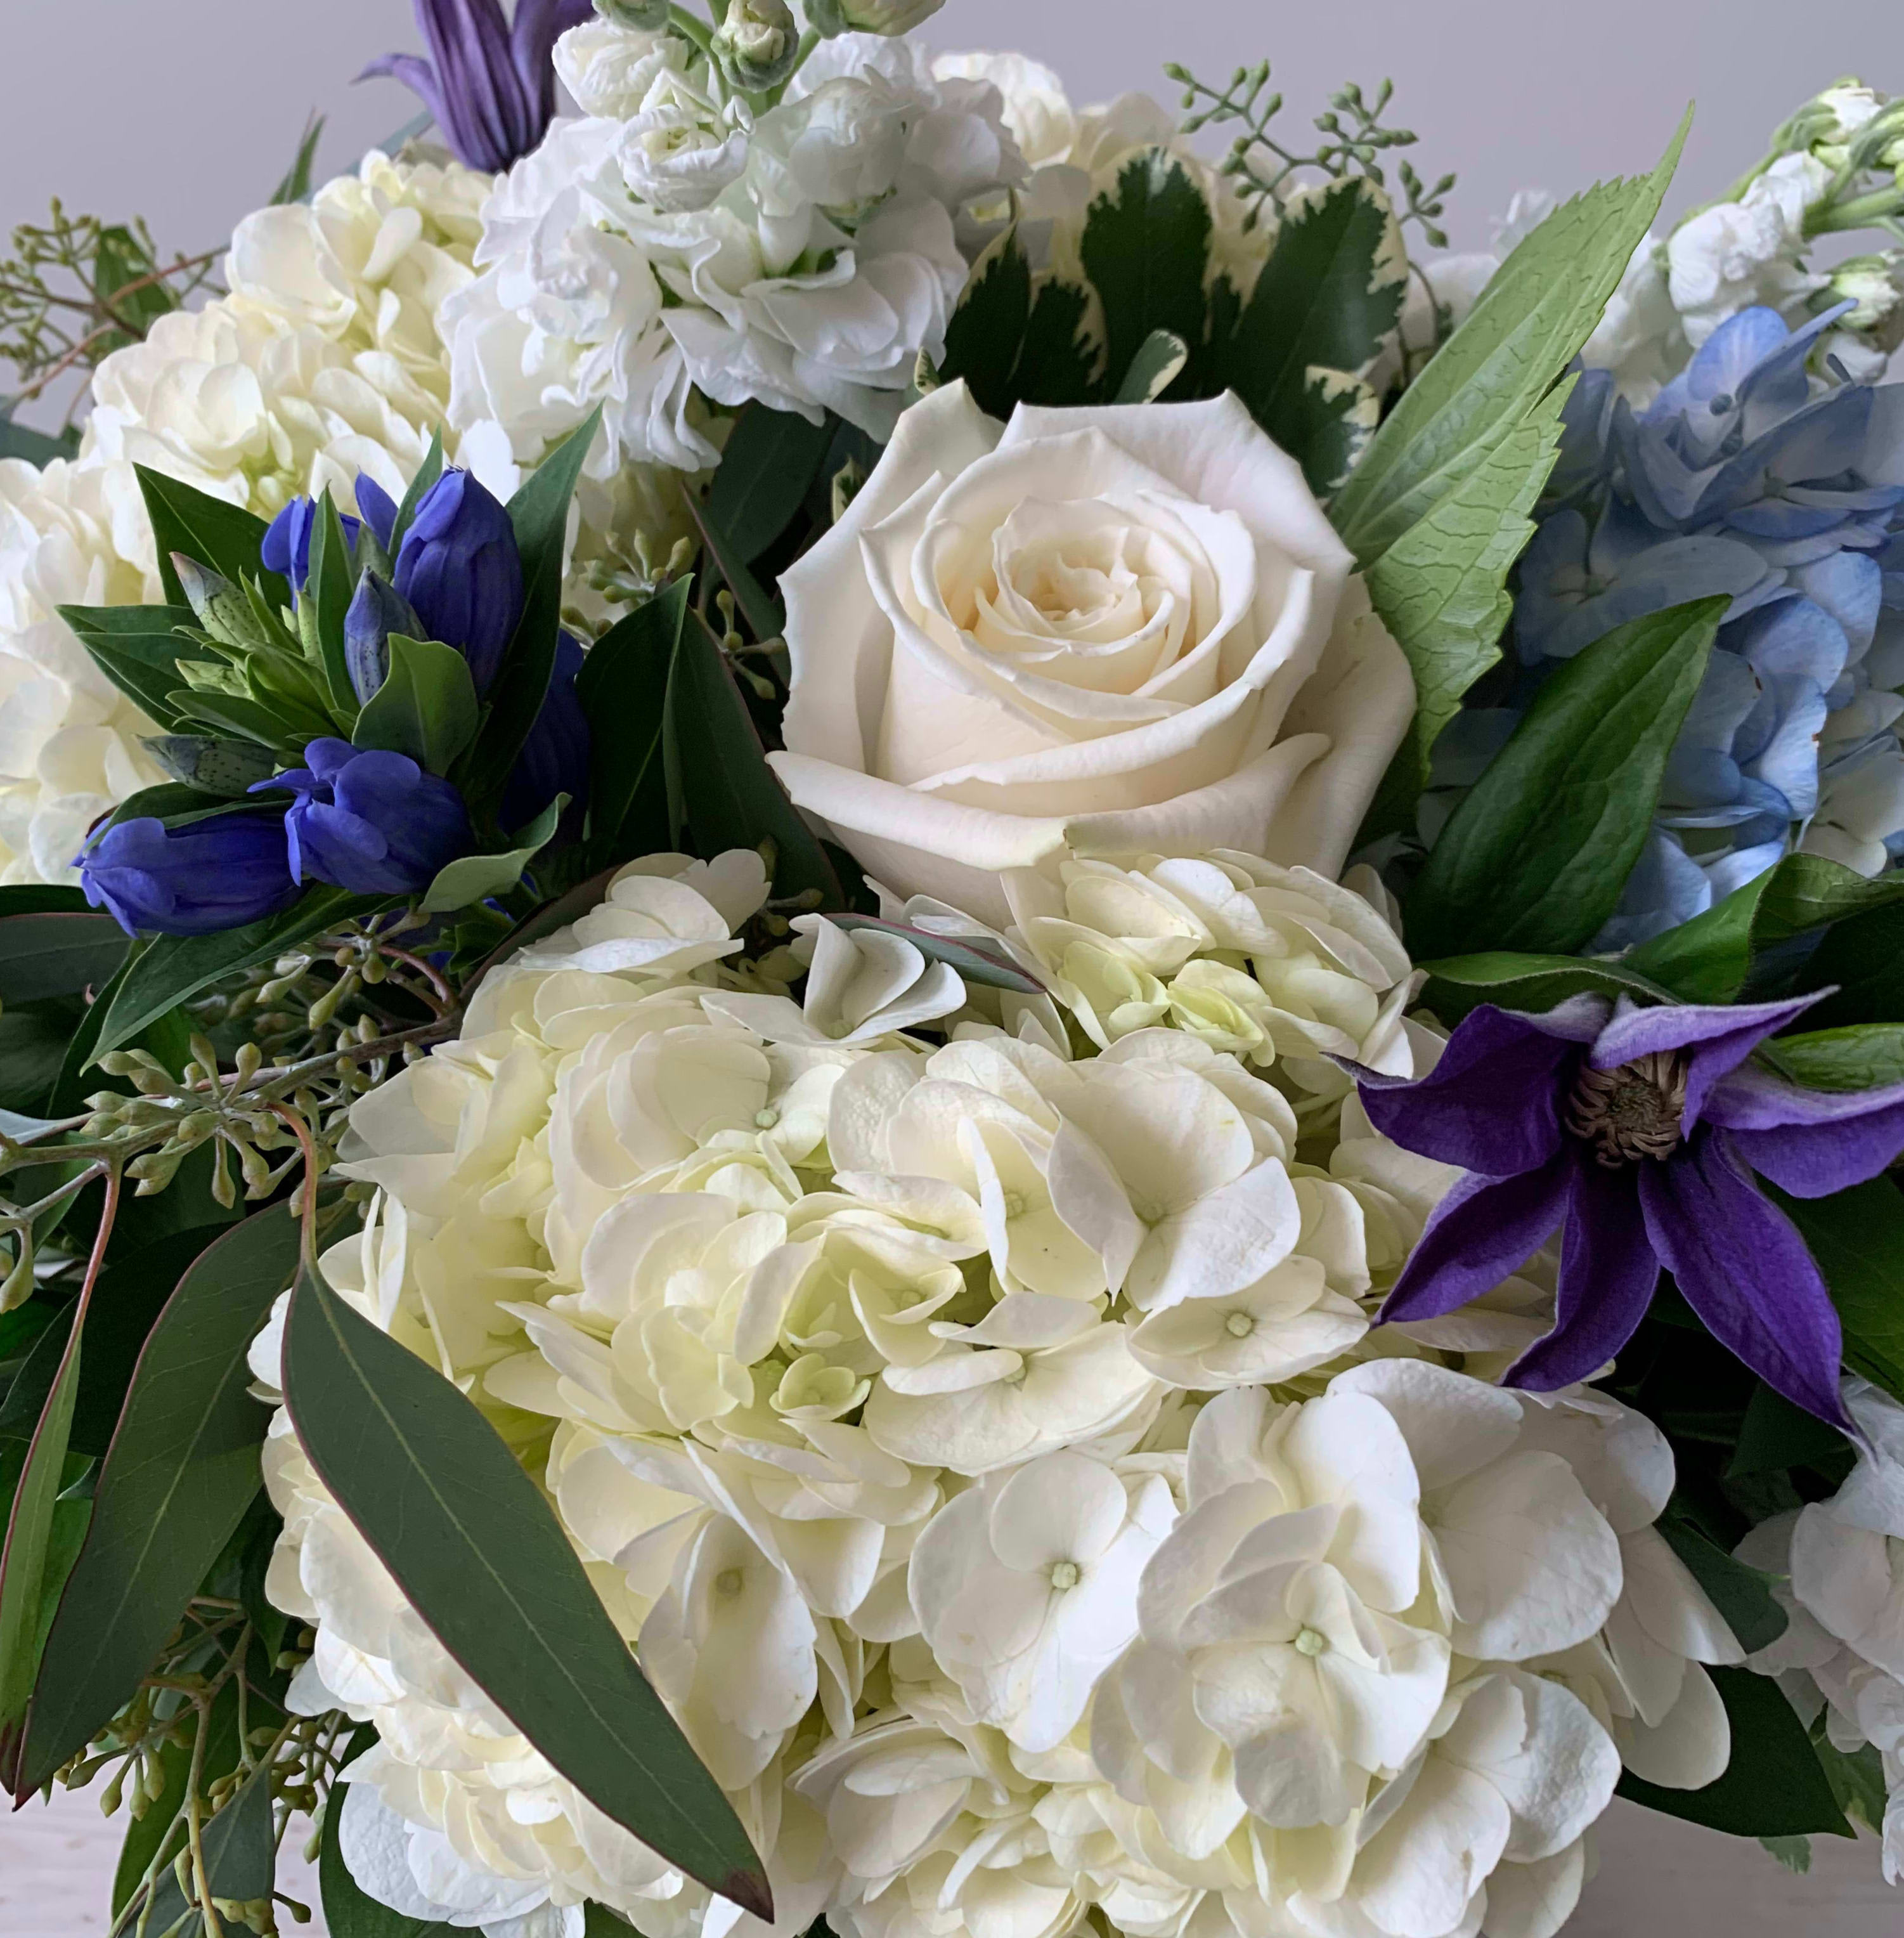 Blues and Whites - Designer's Choice - Let us do the hard work!  We'll design you a custom arrangement using a mix of the freshest blue and white blooms available.  Flowers shown in the picture are for example and not a guarantee of the type of flowers used.  